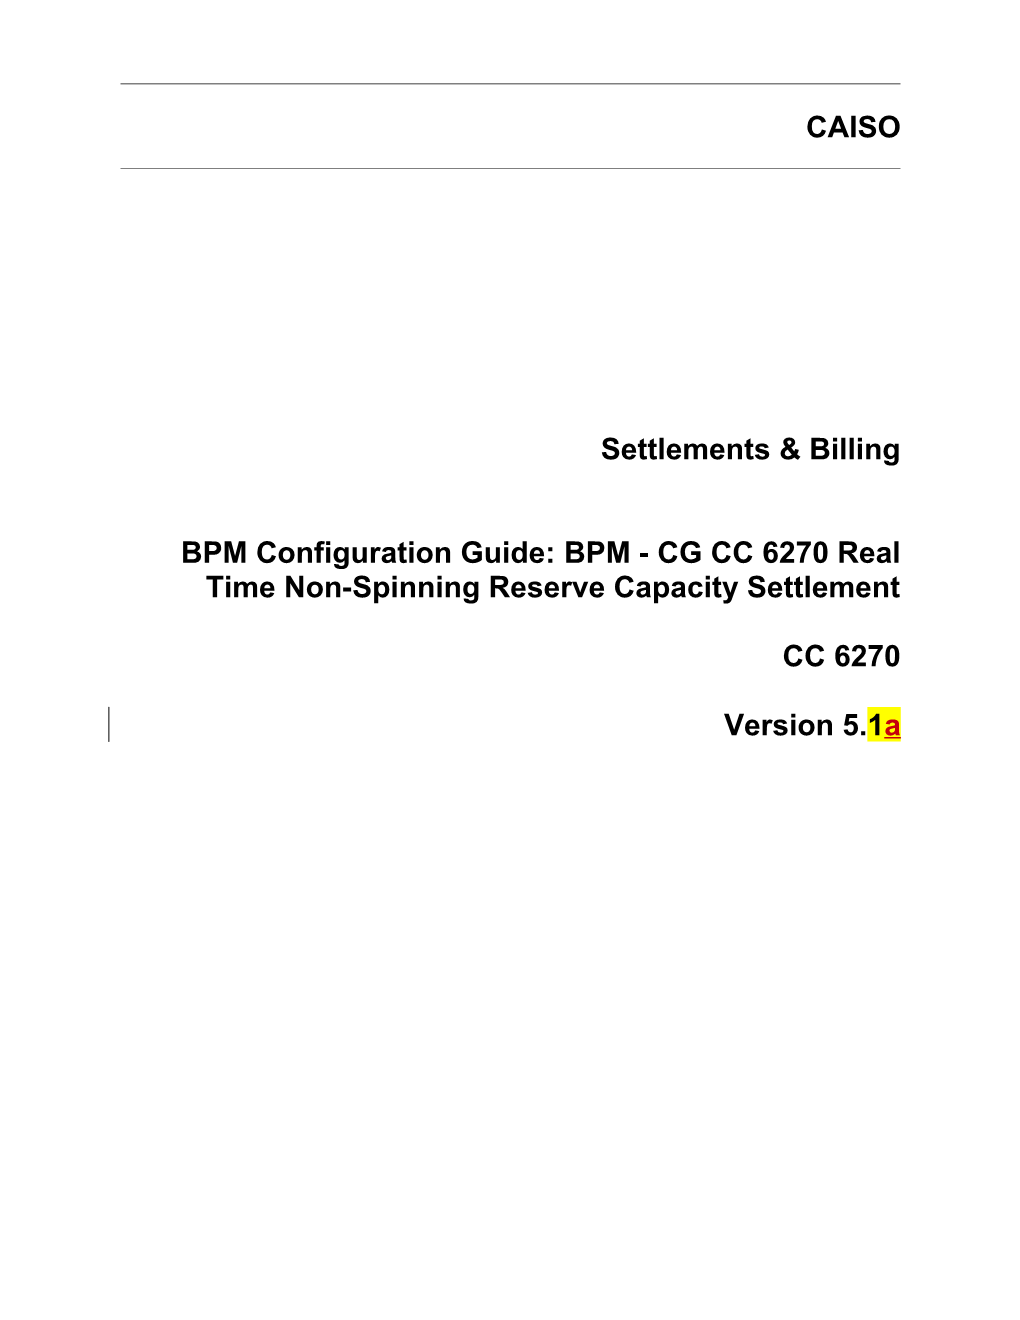 BPM - CG CC 6270 Real Time Non-Spinning Reserve Capacity Settlement